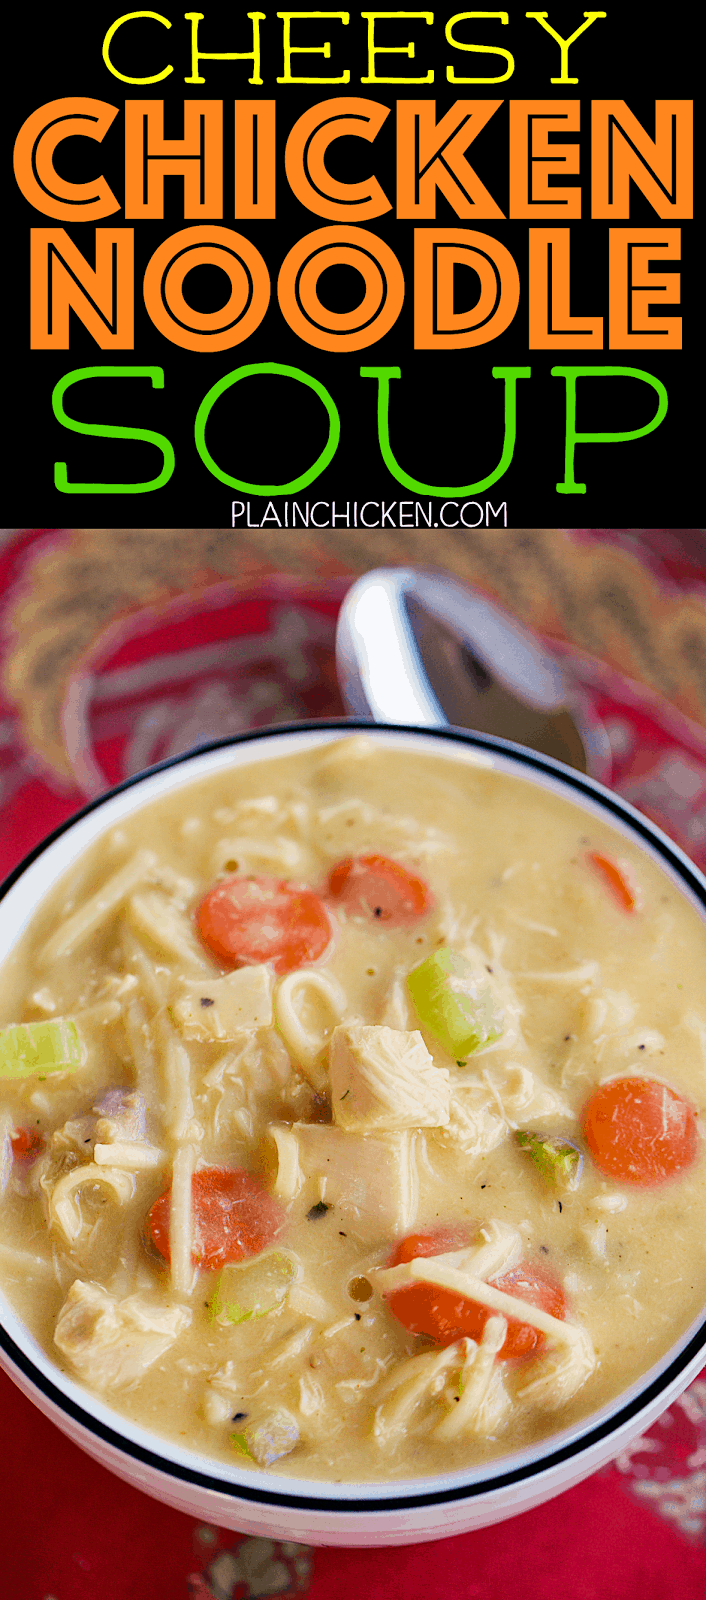 Cheesy Chicken Noodle Soup - ready in under 30 minutes! Just dump everything in the pot and let it simmer. SO easy! We LOVE this soup!!! Chicken, cheese soup, chicken broth, milk, celery, carrots, egg noodles and cheddar cheese. We make this at least once a month. 